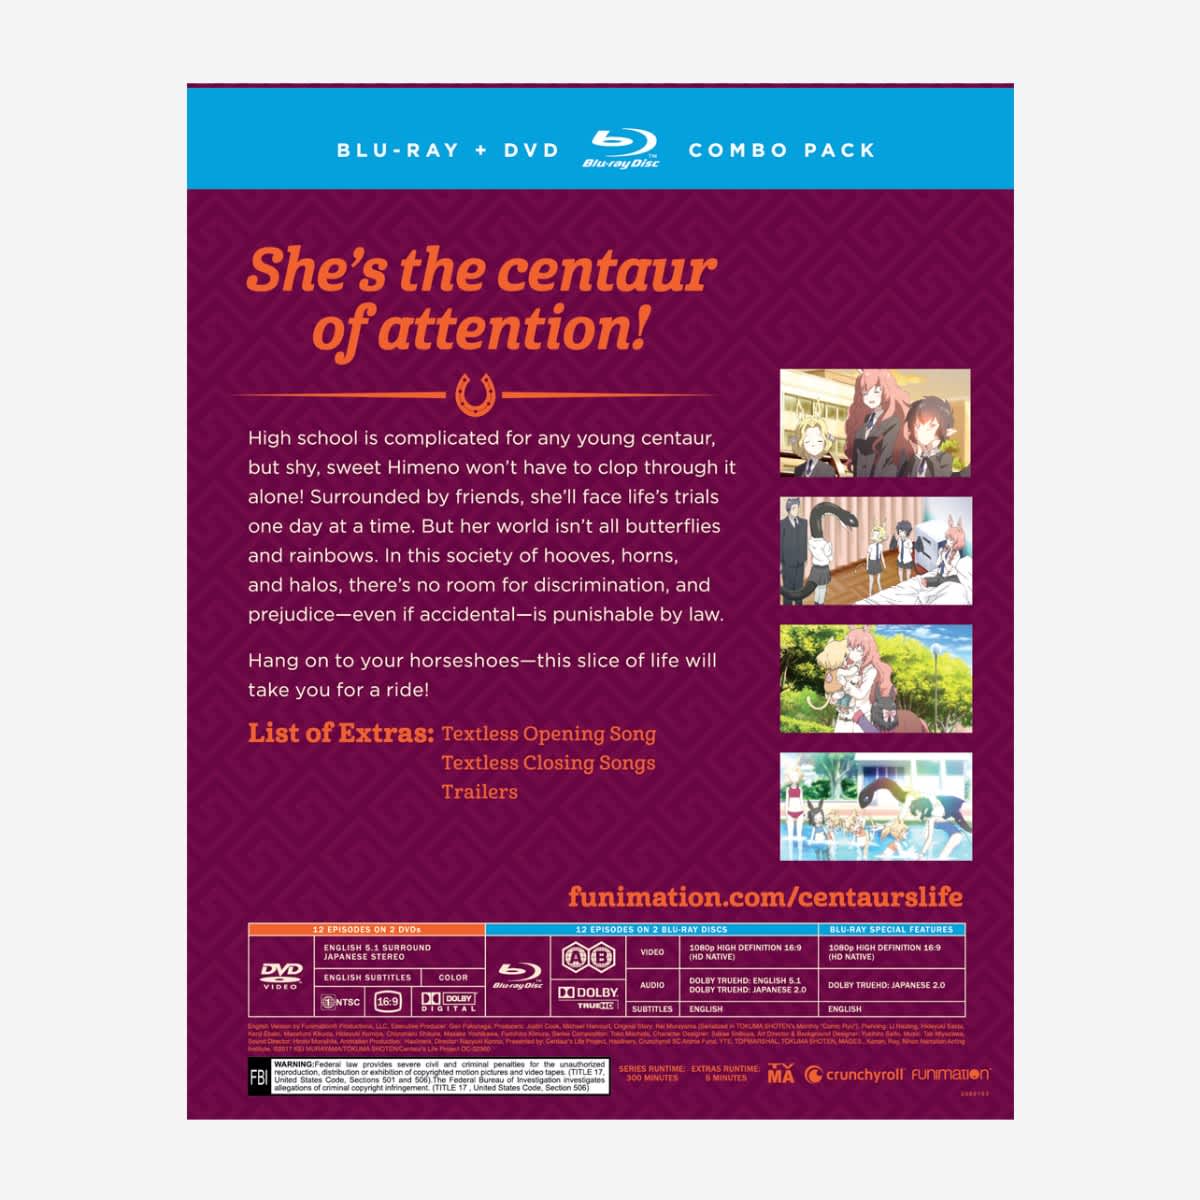 A Centaur's Life - The Complete Series - Blu-ray + DVD image count 1